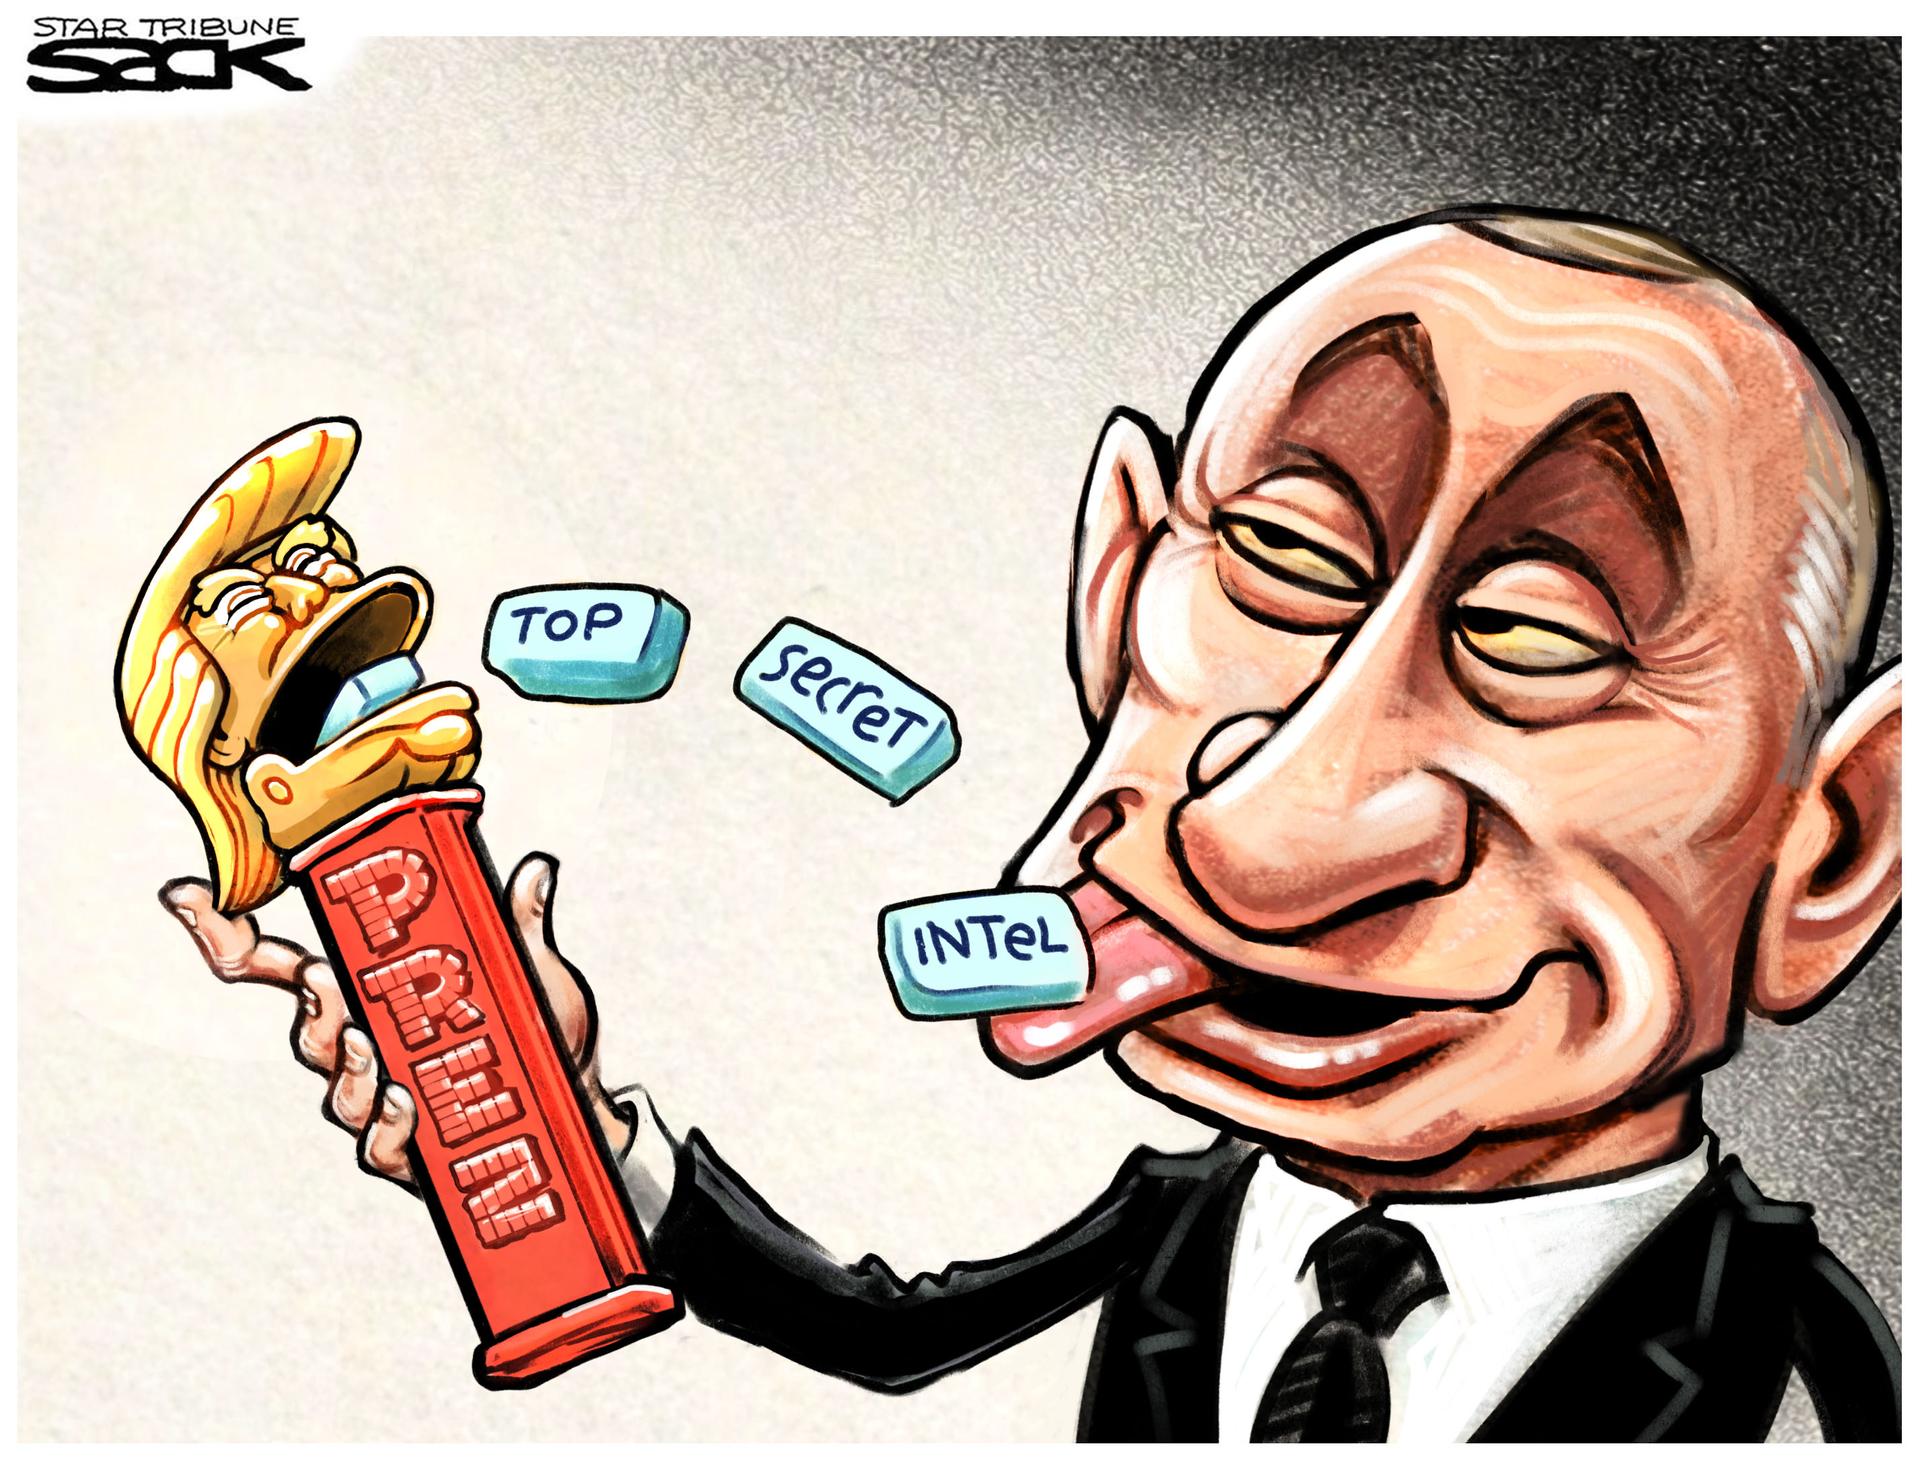 Putin holding a Prez dispenser with Trump's head on top of it. Putin clicks it and intelligence chunks come out.